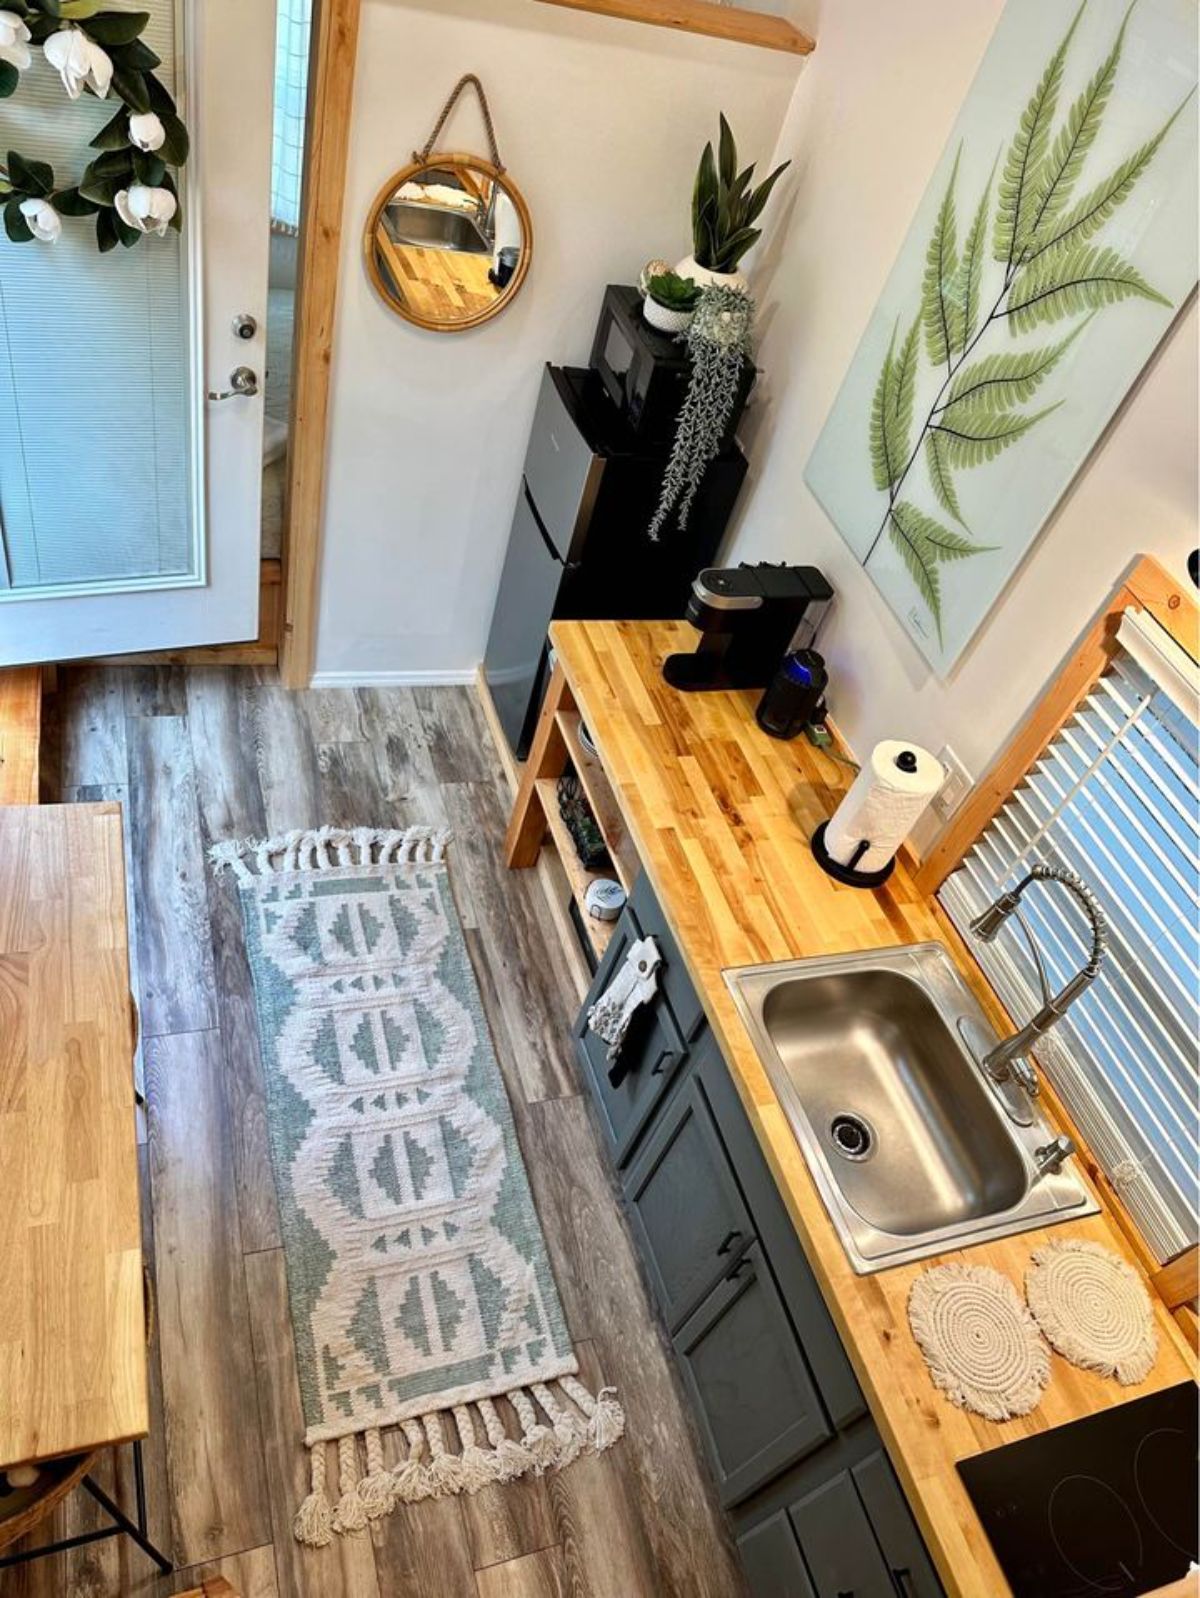 Stunning wooden interiors of 20’ turnkey ready tiny house